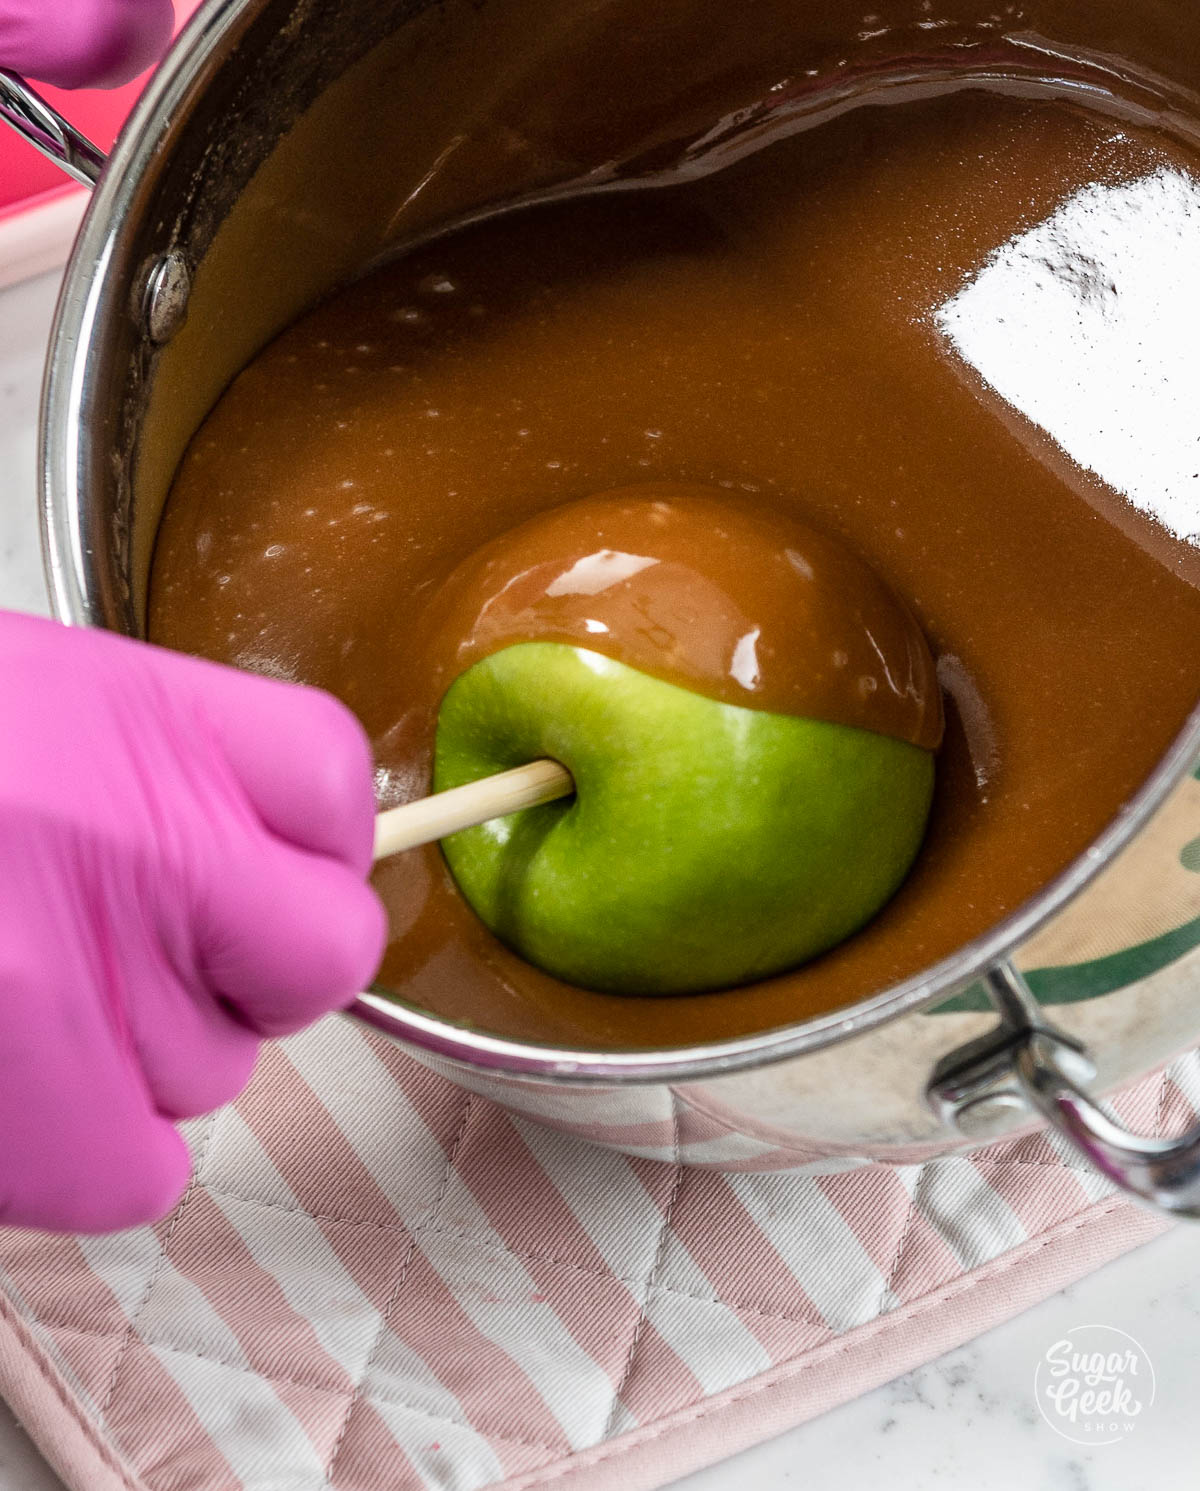 closeup of apple being dipped into caramel